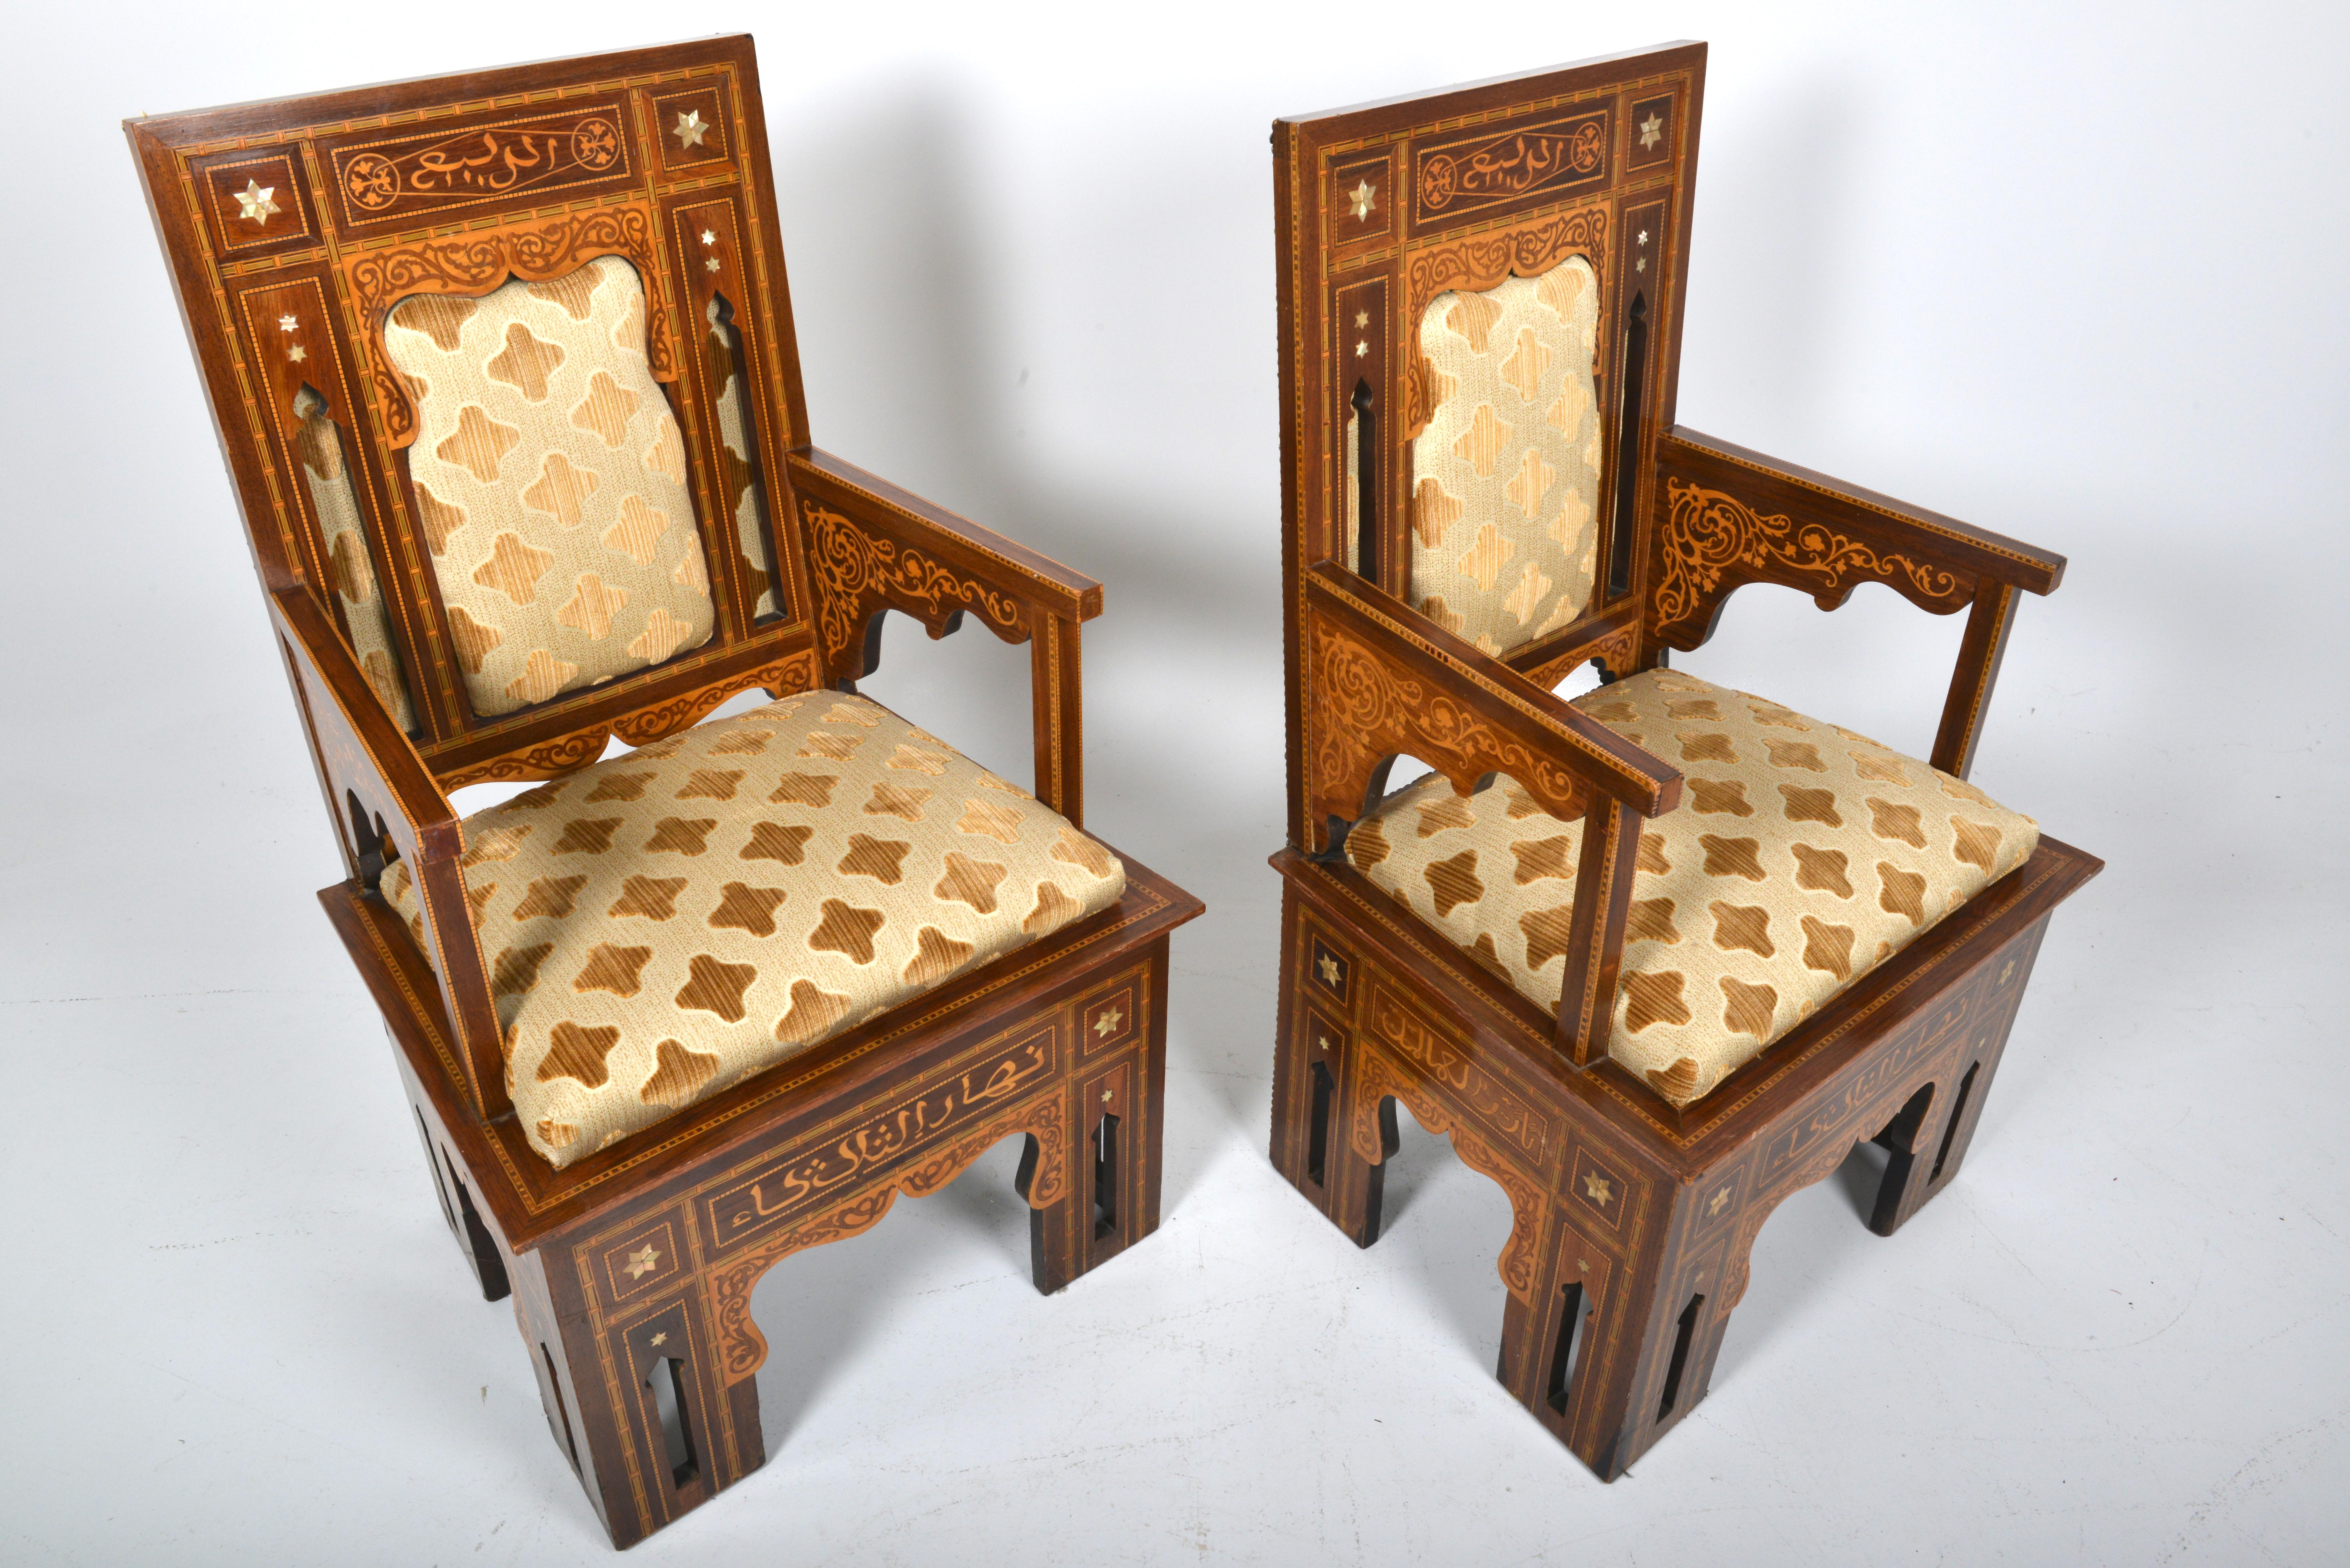 Syrian pair of parquetry armchairs, circa 1950.
This is a striking pair of Middle Eastern stately armchairs. The armrests, backrests, rear and front legs are of an unusual design. Syria is known for its craftmanship with regard to wood furniture.